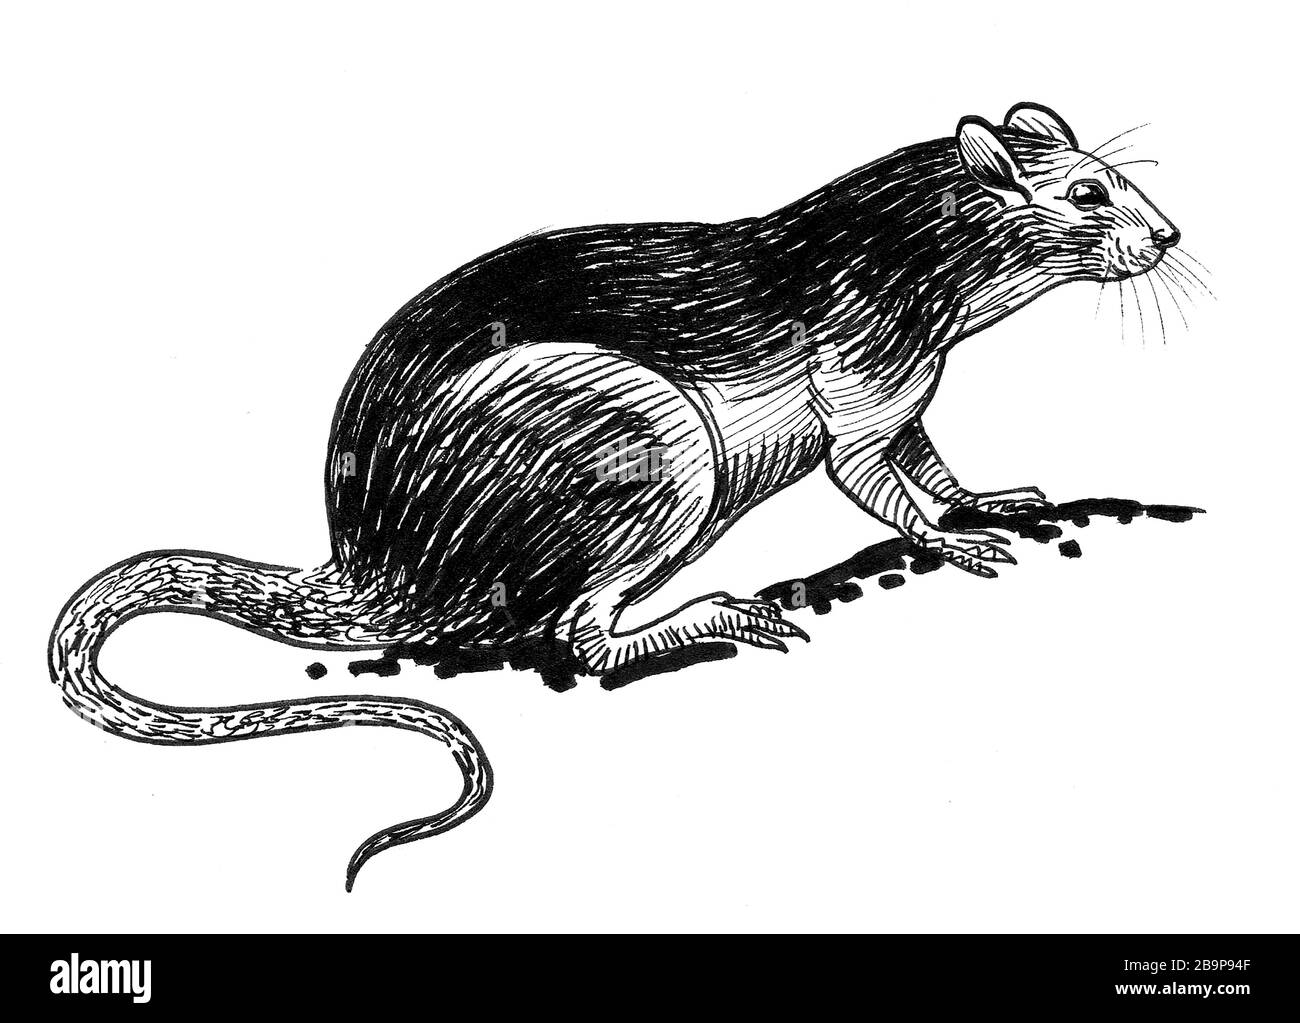 Common rat. Ink black and white drawing Stock Photo